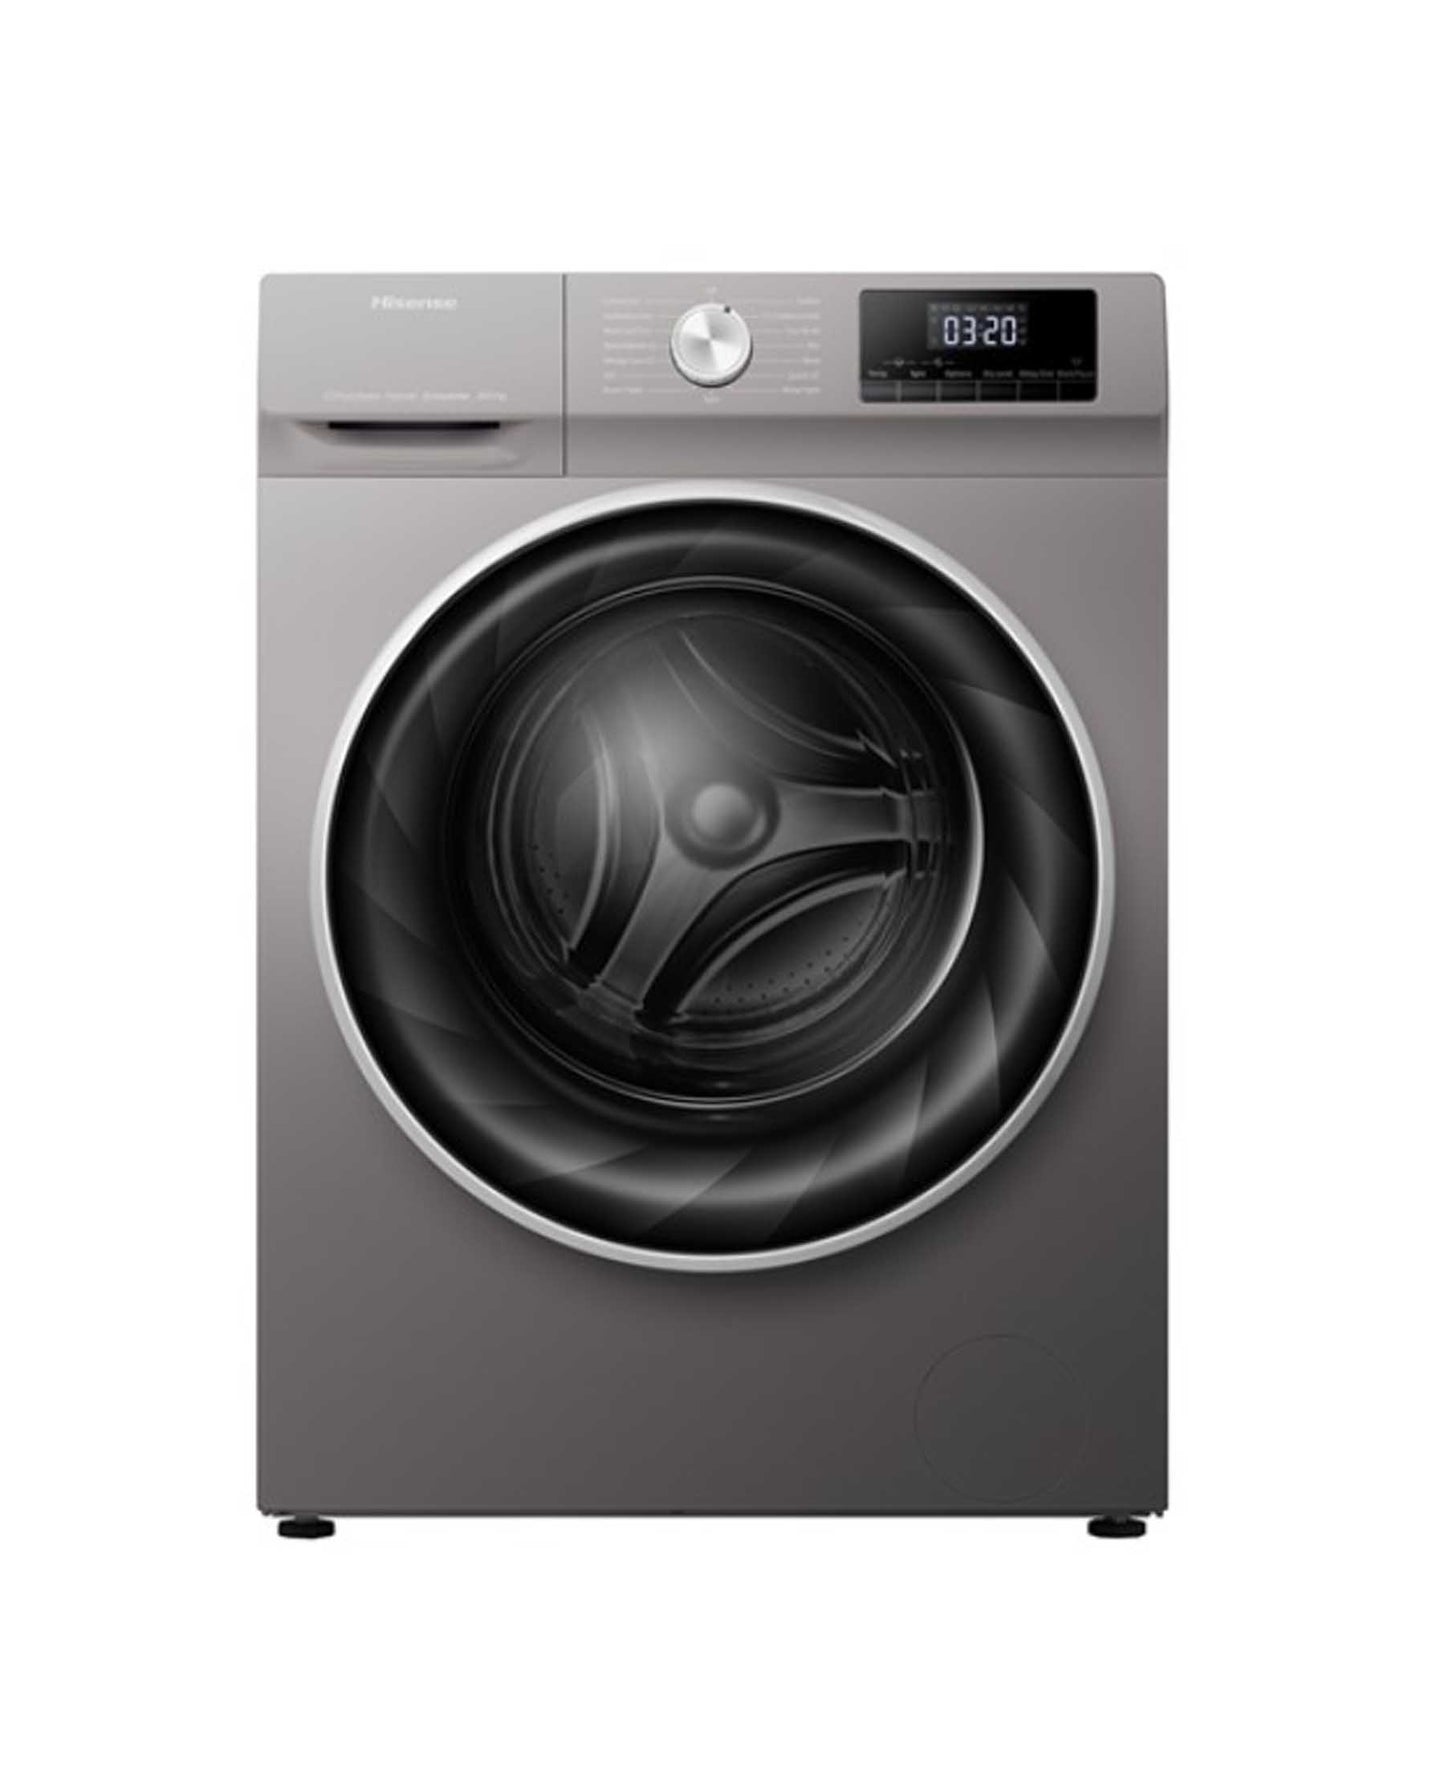 Hisense 10KG FRONT LOAD WASHER AND DRYER WDQY1014EVJM